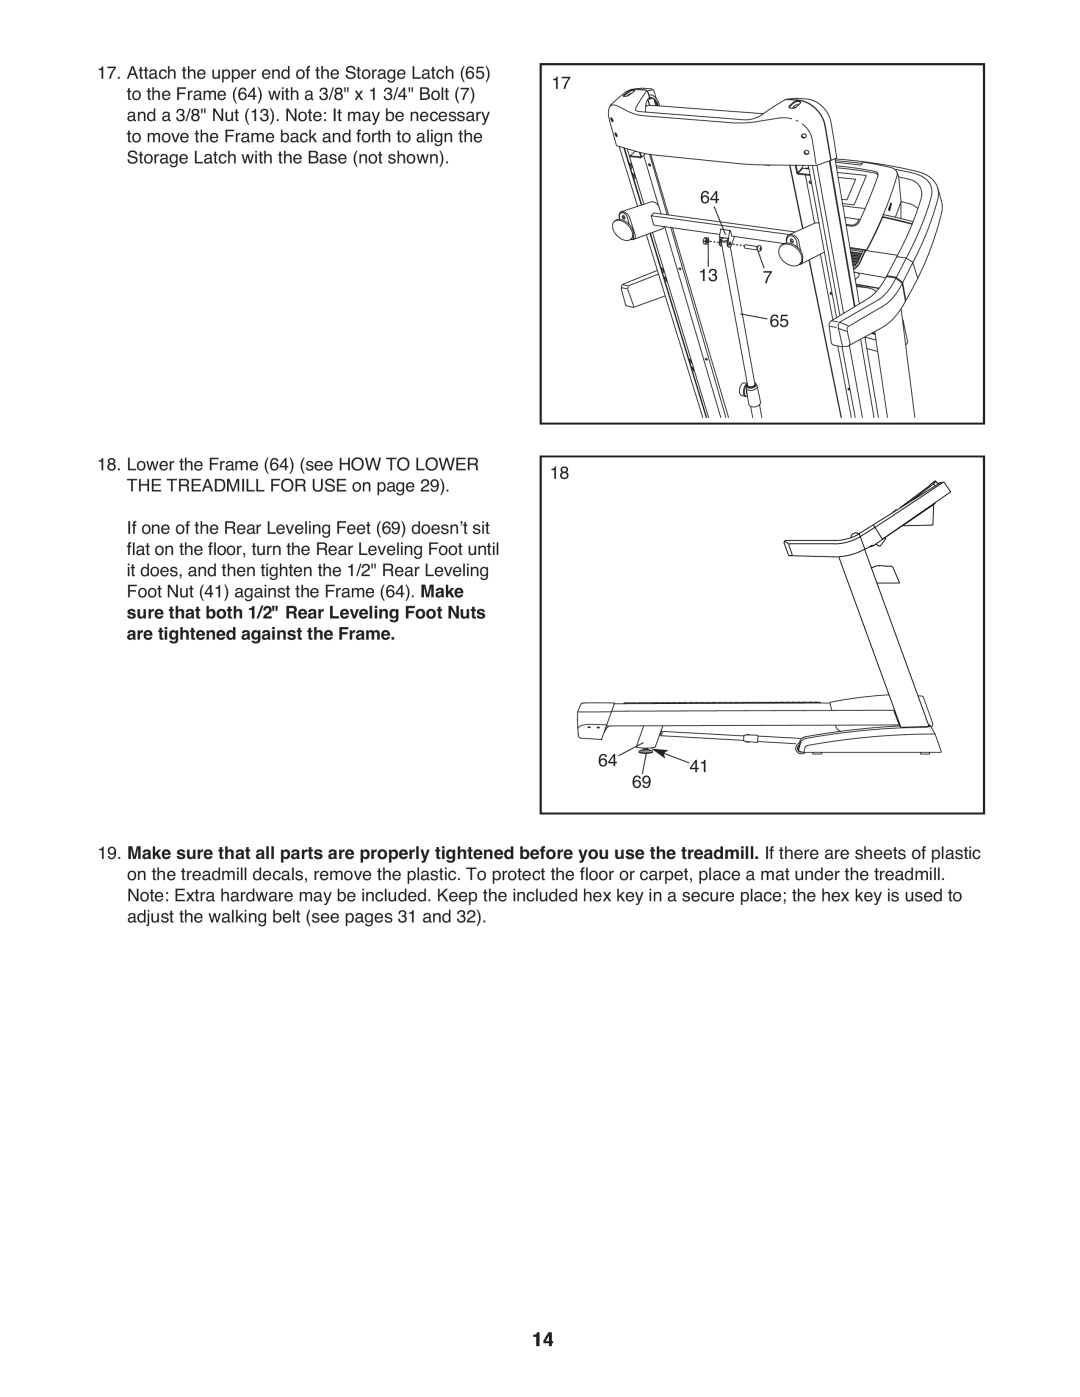 ProForm 2400 warranty Lower the Frame 64 see HOW TO LOWER THE TREADMILL FOR USE on page 